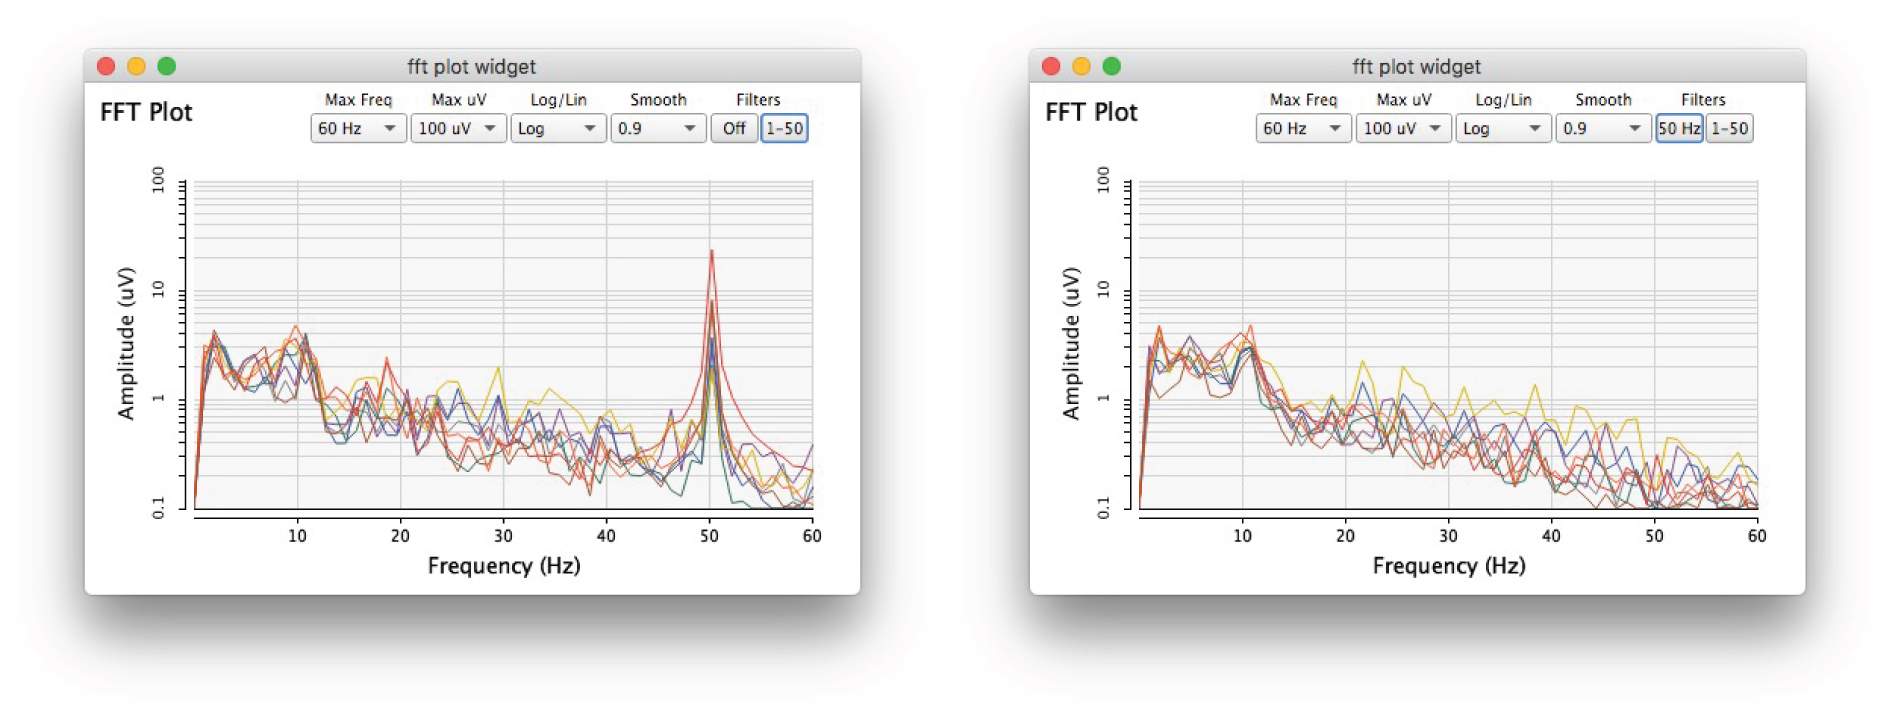 FFT plot of the OpenBCI-SuperCollider Interface with only the 1-50 Hz bandpass filter enabled (left) and an additional 50 Hz notch filter (right).